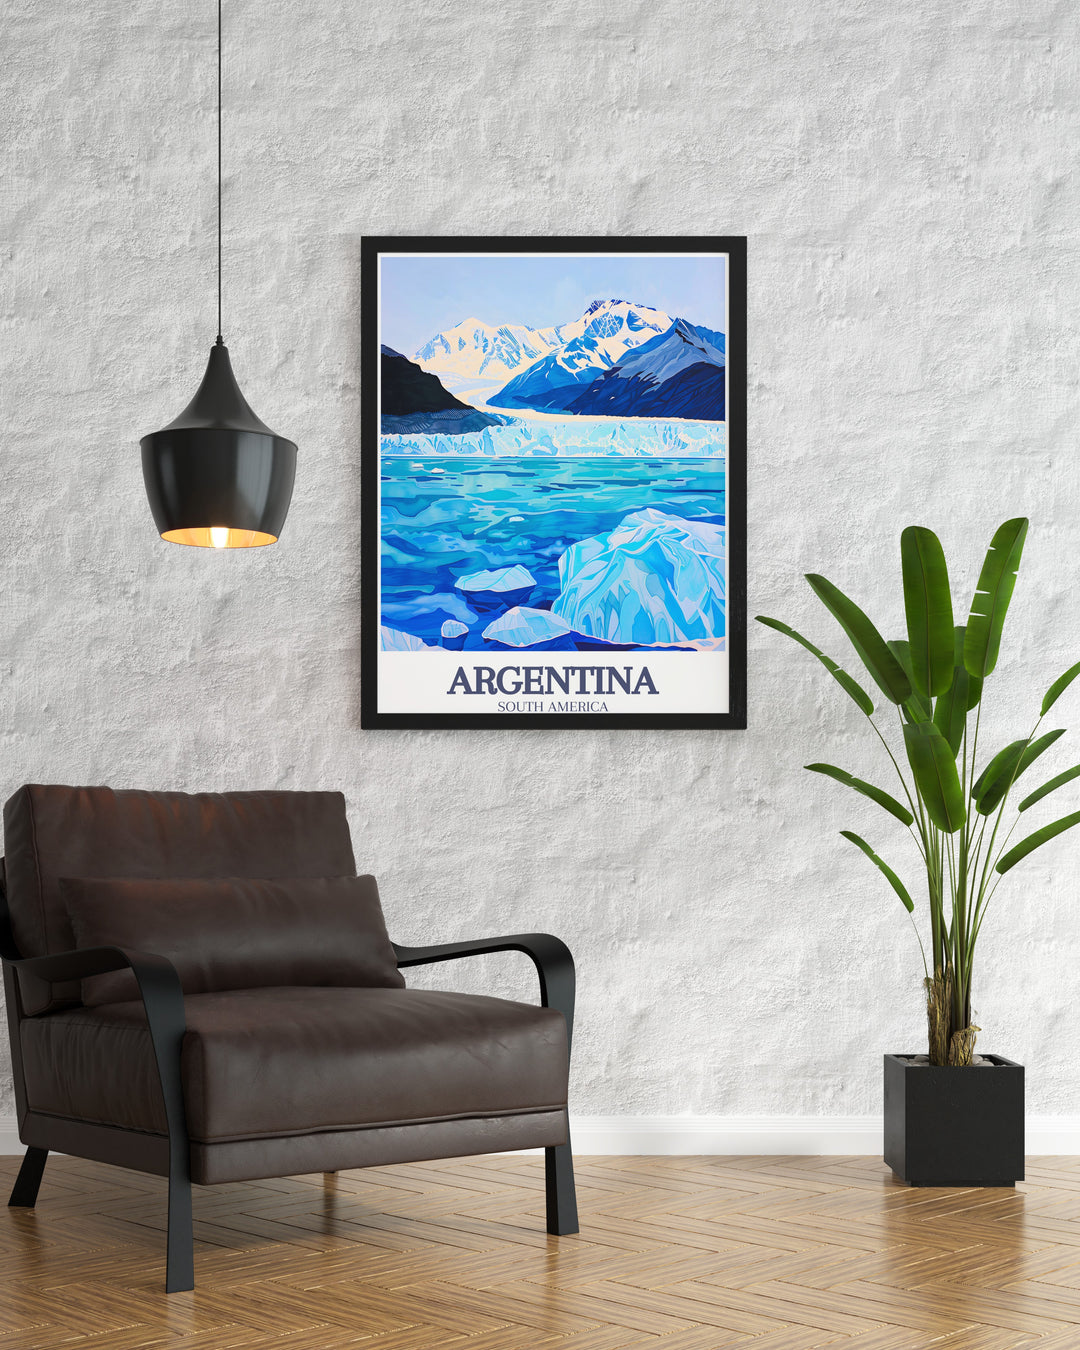 Perito Moreno Glacier, Los Glaciares National Park stunning prints ideal for home decor. These Argentina artwork pieces highlight the breathtaking beauty of the glacier, making them perfect for creating a serene and inspiring atmosphere.